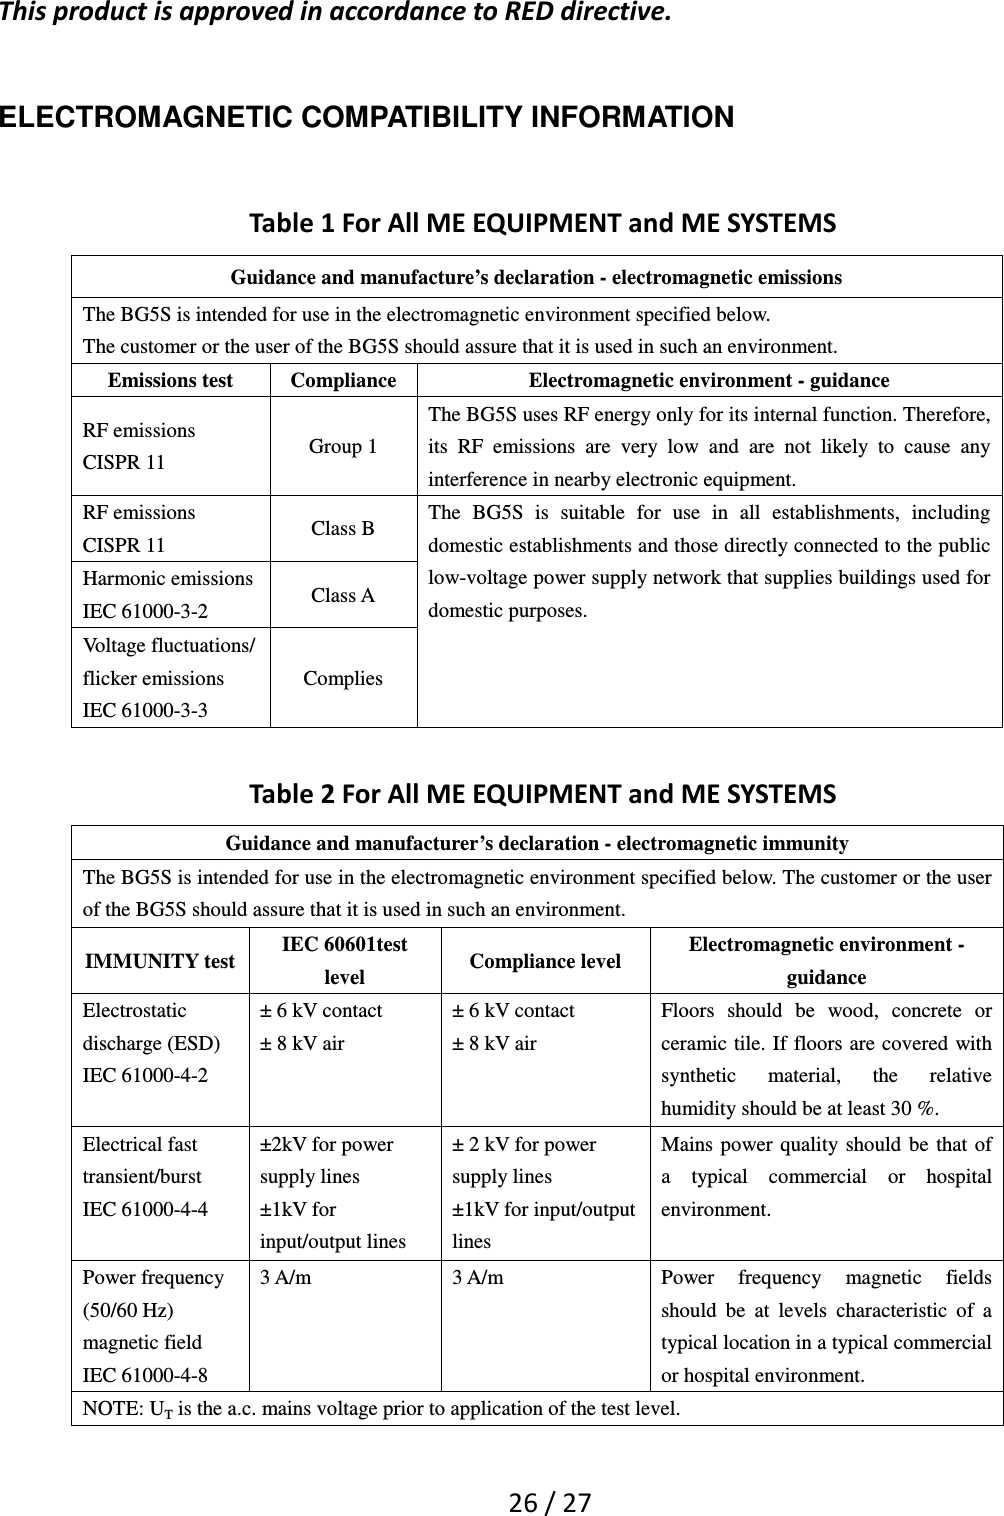   26 / 27  This product is approved in accordance to RED directive. ELECTROMAGNETIC COMPATIBILITY INFORMATION Table 1 For All ME EQUIPMENT and ME SYSTEMS Guidance and manufacture’s declaration - electromagnetic emissions The BG5S is intended for use in the electromagnetic environment specified below. The customer or the user of the BG5S should assure that it is used in such an environment. Emissions test  Compliance  Electromagnetic environment - guidance RF emissions CISPR 11  Group 1 The BG5S uses RF energy only for its internal function. Therefore, its  RF  emissions  are  very  low  and  are  not  likely  to  cause  any interference in nearby electronic equipment. RF emissions CISPR 11  Class B  The  BG5S  is  suitable  for  use  in  all  establishments,  including domestic establishments and those directly connected to the public low-voltage power supply network that supplies buildings used for domestic purposes. Harmonic emissions IEC 61000-3-2  Class A Voltage fluctuations/ flicker emissions IEC 61000-3-3 Complies  Table 2 For All ME EQUIPMENT and ME SYSTEMS Guidance and manufacturer’s declaration - electromagnetic immunity The BG5S is intended for use in the electromagnetic environment specified below. The customer or the user of the BG5S should assure that it is used in such an environment. IMMUNITY test IEC 60601test level  Compliance level  Electromagnetic environment - guidance Electrostatic discharge (ESD) IEC 61000-4-2 ± 6 kV contact ± 8 kV air ± 6 kV contact ± 8 kV air Floors  should  be  wood,  concrete  or ceramic tile. If floors are covered with synthetic  material,  the  relative humidity should be at least 30 %. Electrical fast transient/burst IEC 61000-4-4 ±2kV for power supply lines ±1kV for input/output lines ± 2 kV for power supply lines ±1kV for input/output lines Mains power  quality  should  be  that of a  typical  commercial  or  hospital environment. Power frequency (50/60 Hz) magnetic field IEC 61000-4-8 3 A/m  3 A/m  Power  frequency  magnetic  fields should  be  at  levels  characteristic  of  a typical location in a typical commercial or hospital environment. NOTE: UT is the a.c. mains voltage prior to application of the test level.  